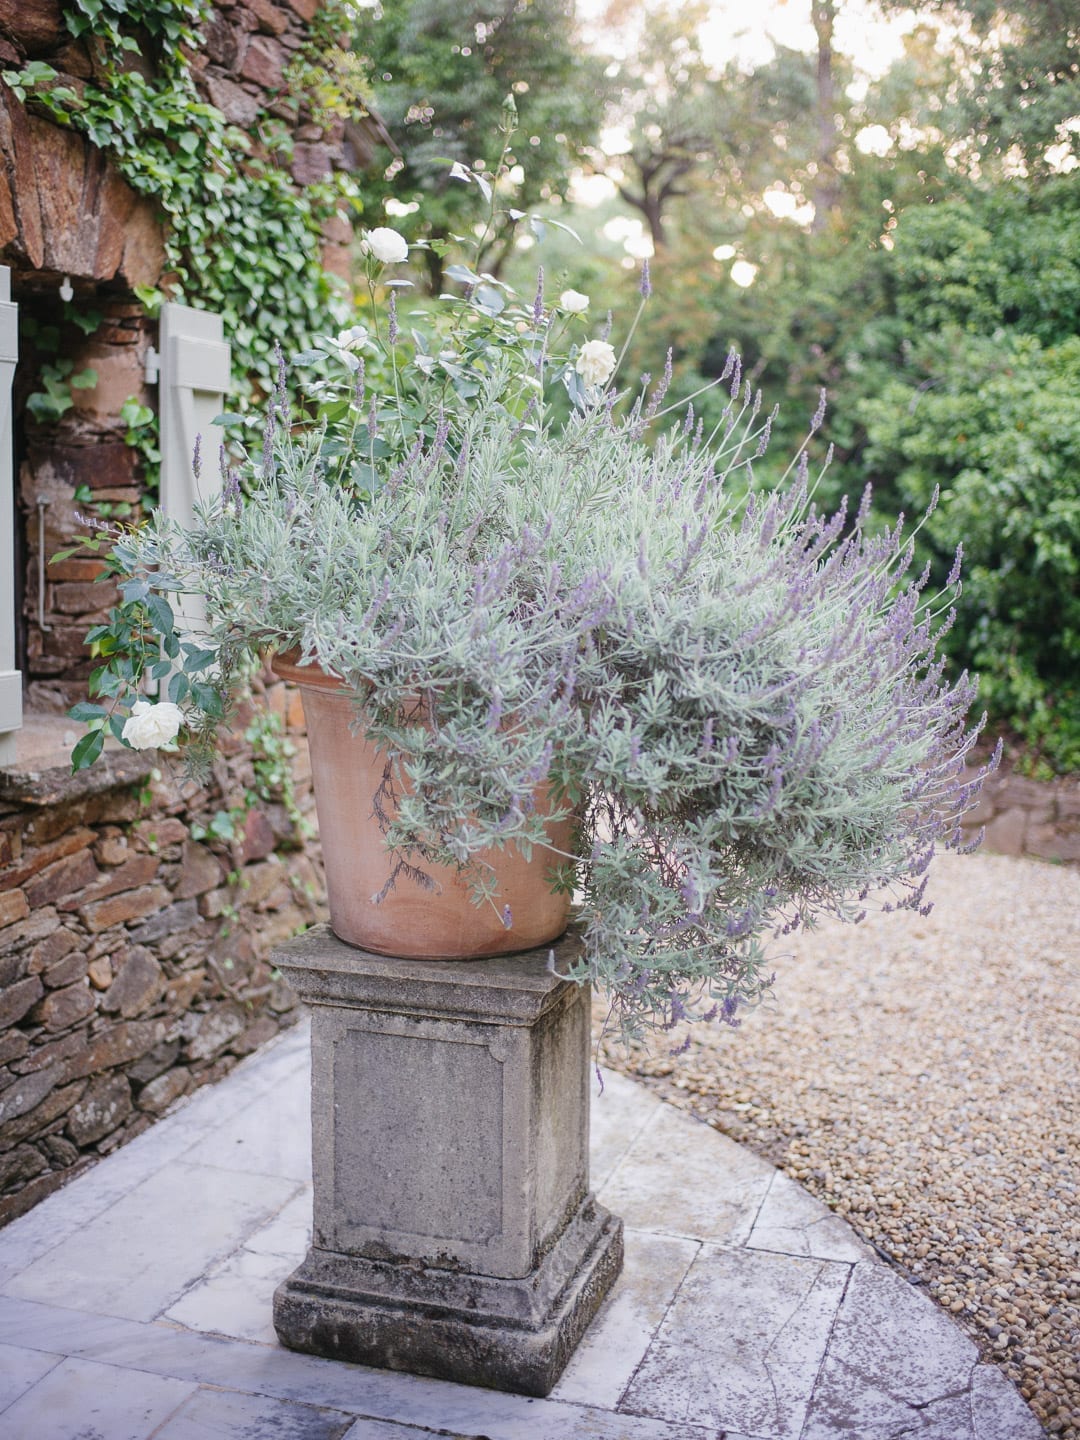 Lavender growing on a pedestal in a French garden - First Glimpse of France